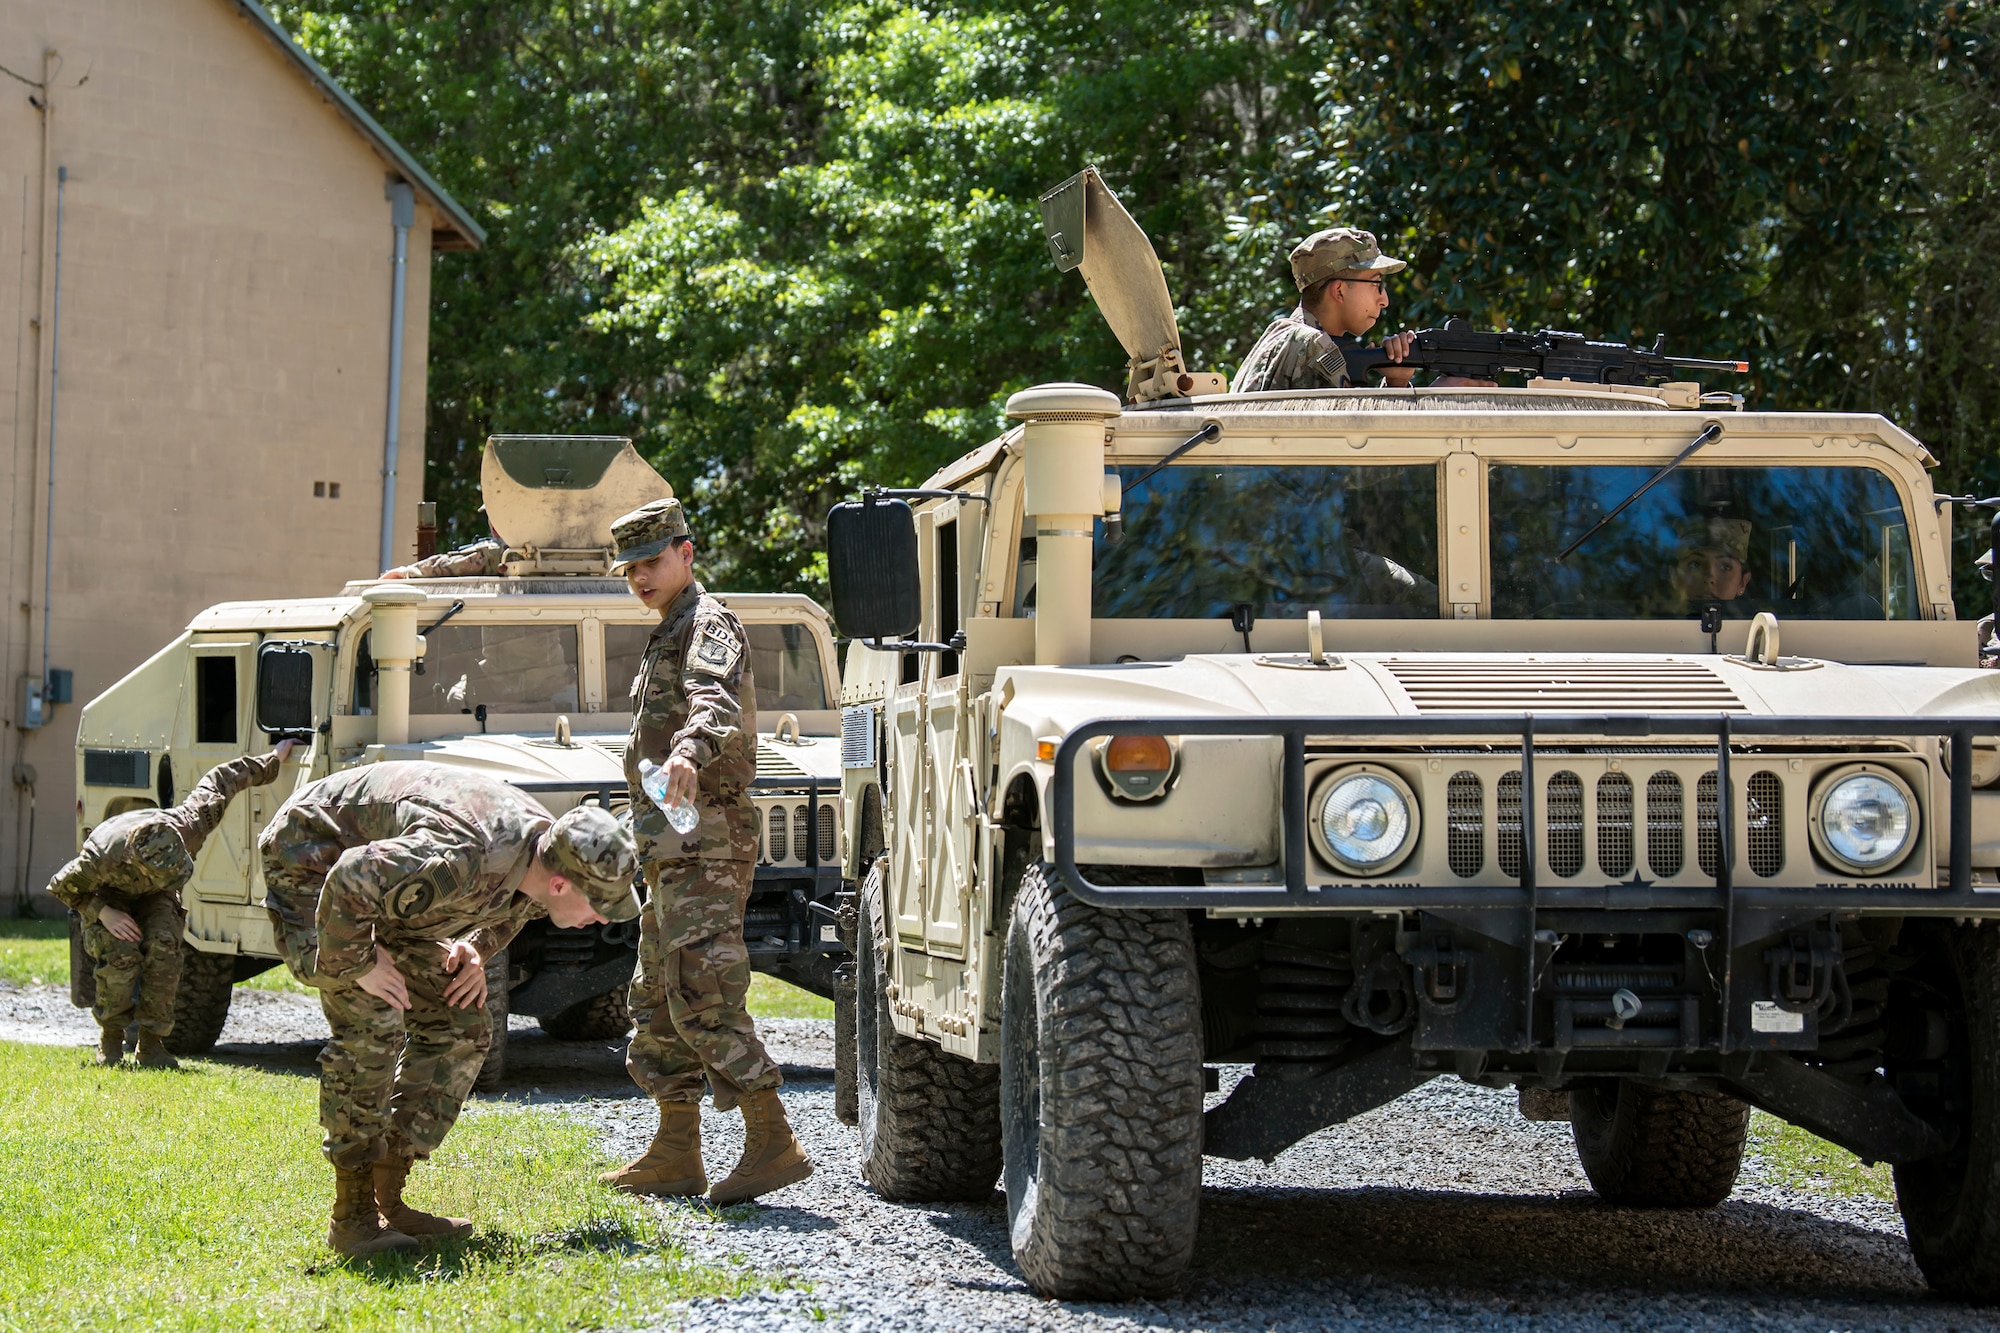 Airmen from the 820th Base Defense Group (BDG), inspect the underbelly of a Humvee during vehicle operations training, March 28, 2018, at Moody Air Force Base, Ga. The vehicle ops training is part of Initial Qualification Training, which gives new Airmen coming into the BDG an opportunity to learn a baseline of basic combat skills that will be needed to successfully operate within a cohesive unit while in a deployed environment. (U.S. Air Force photo by Airman Eugene Oliver)